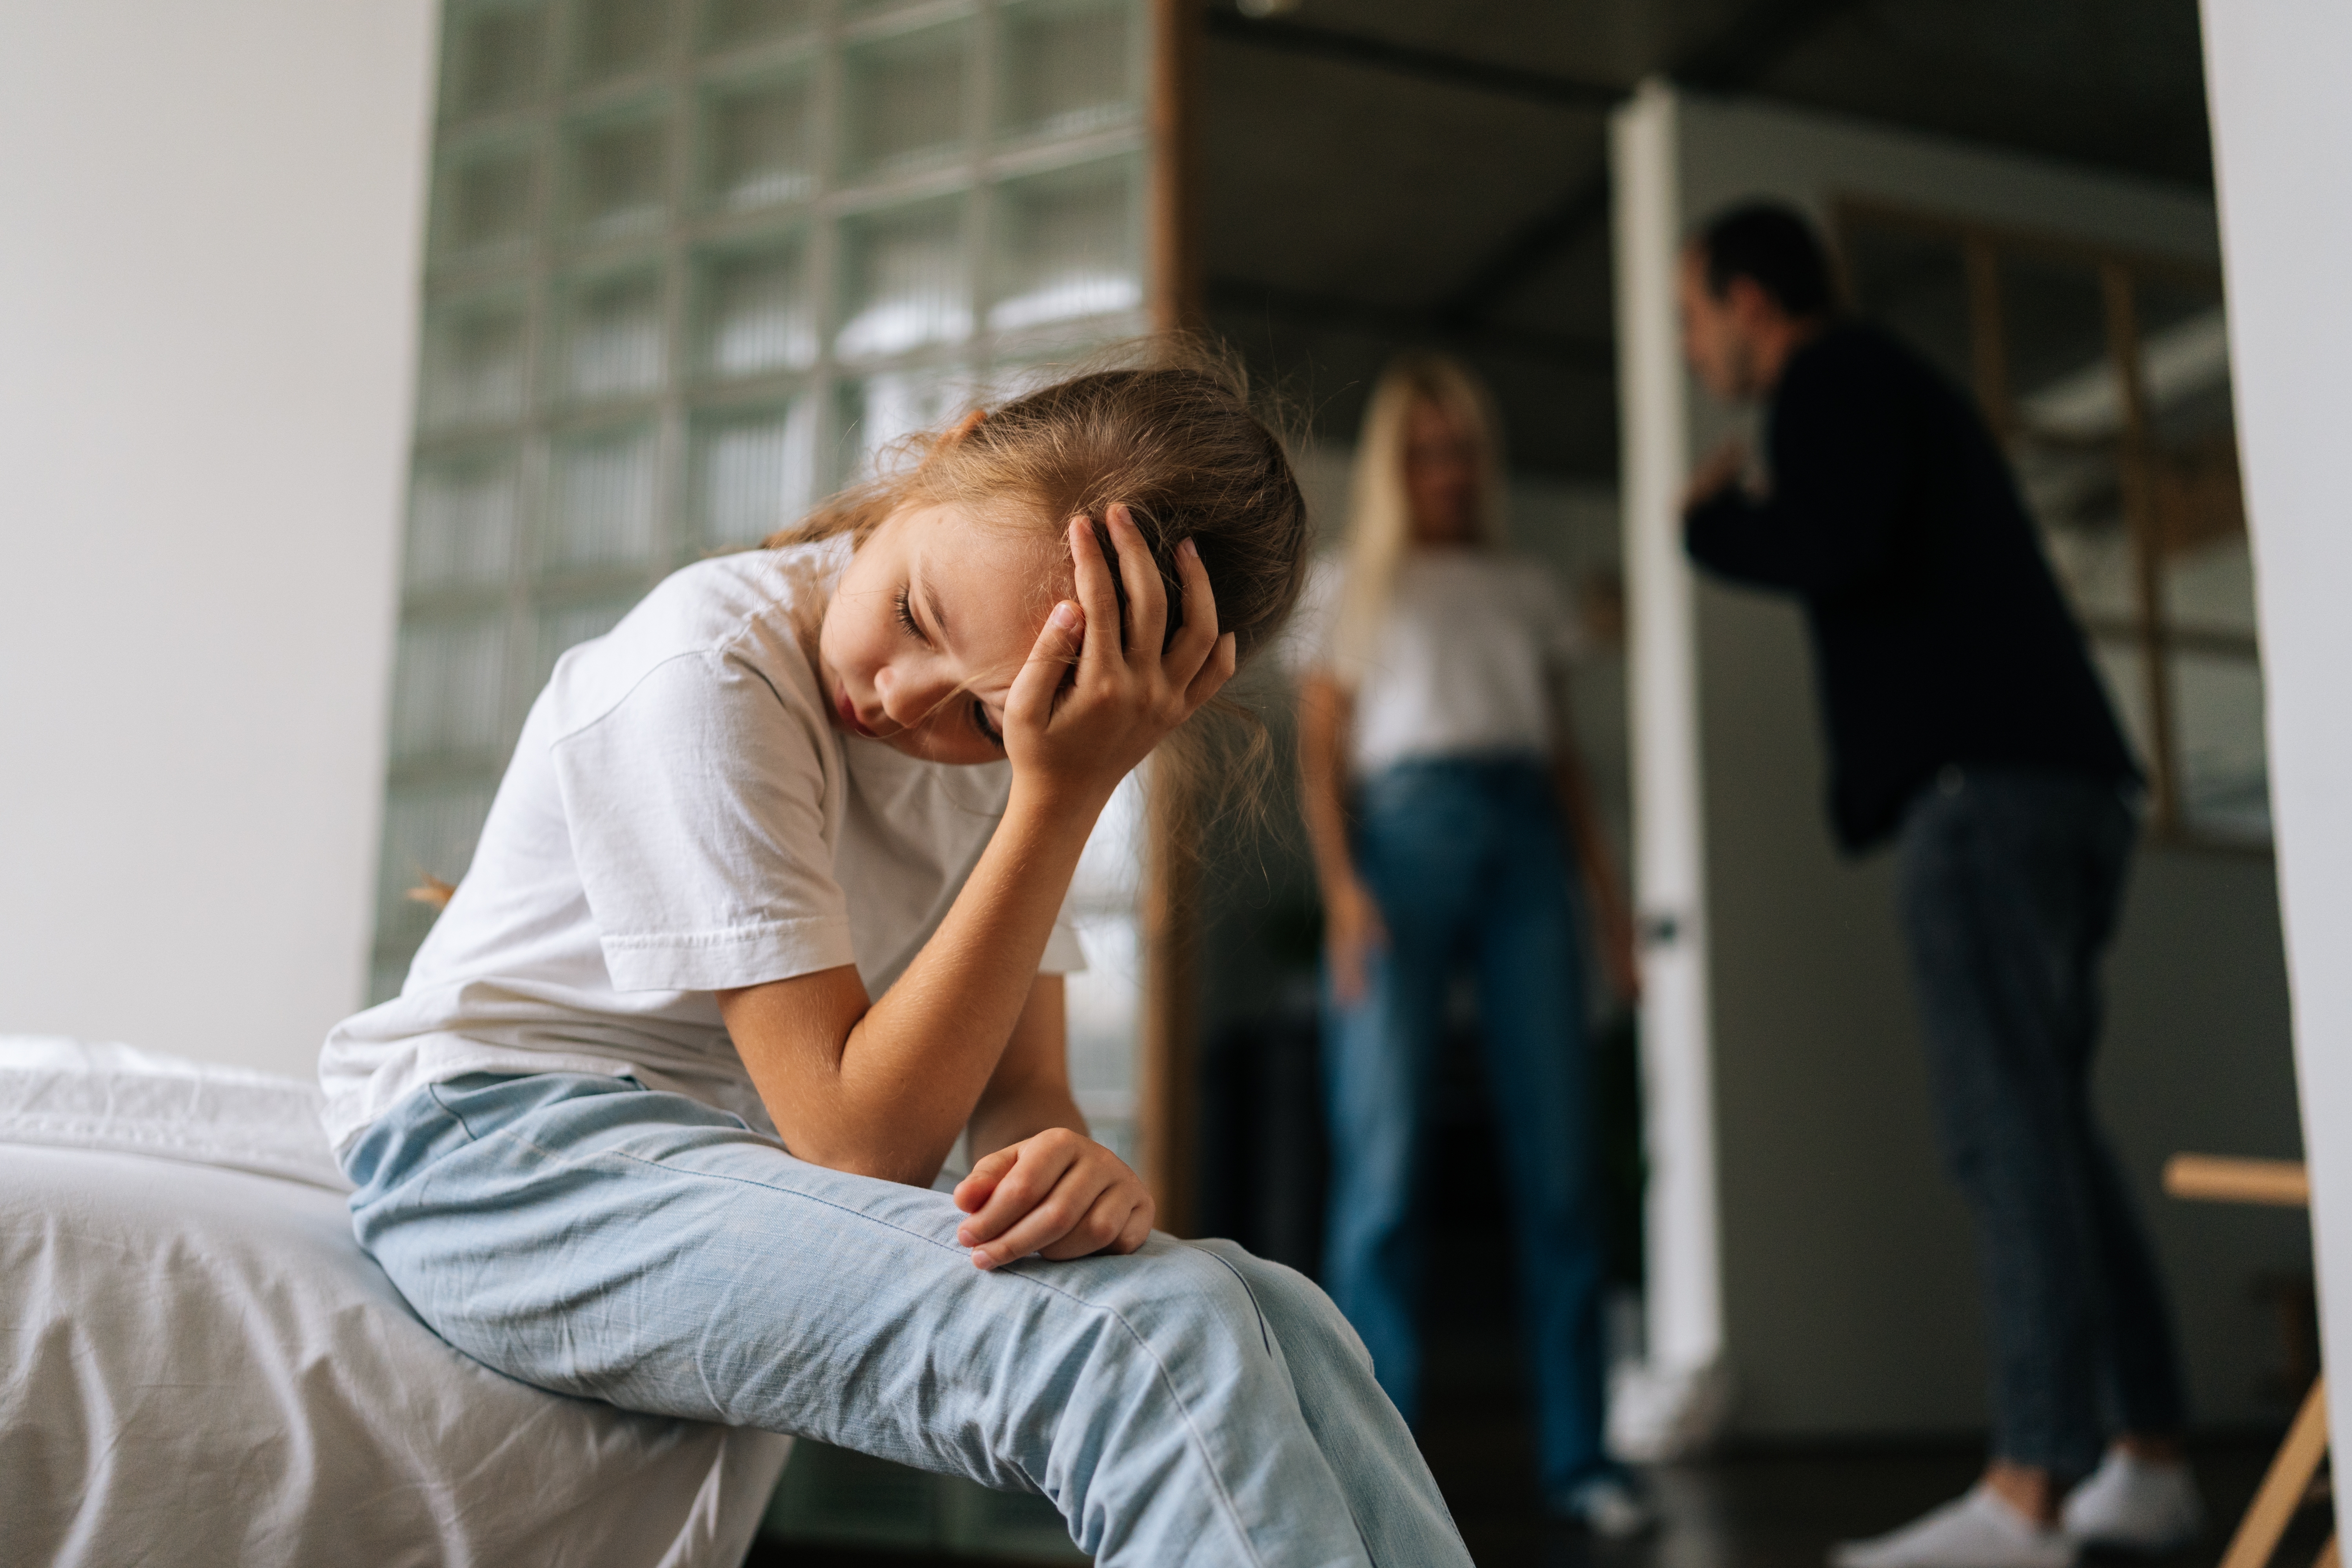 An upset girl sitting on the corner of her bed while her parents argue in the background | Source: Shutterstock